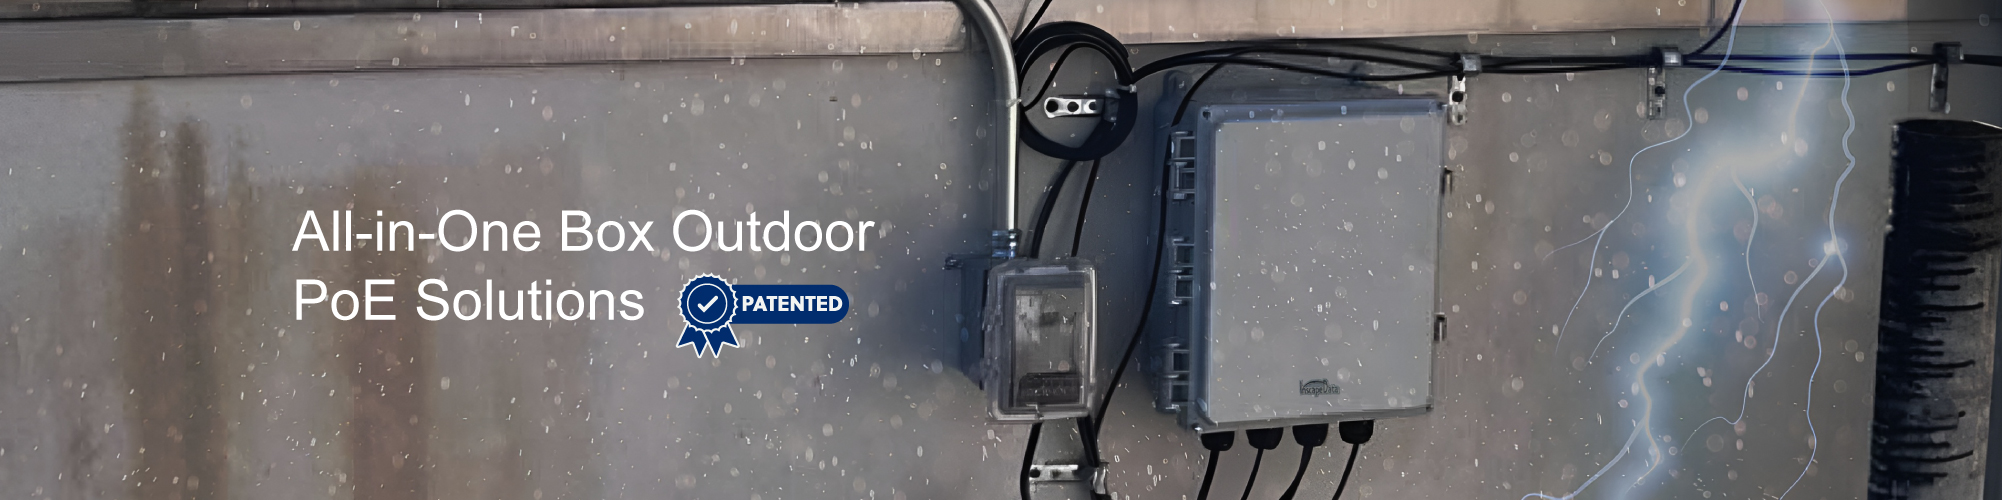 All-in-One Box Outdoor PoE Solutions